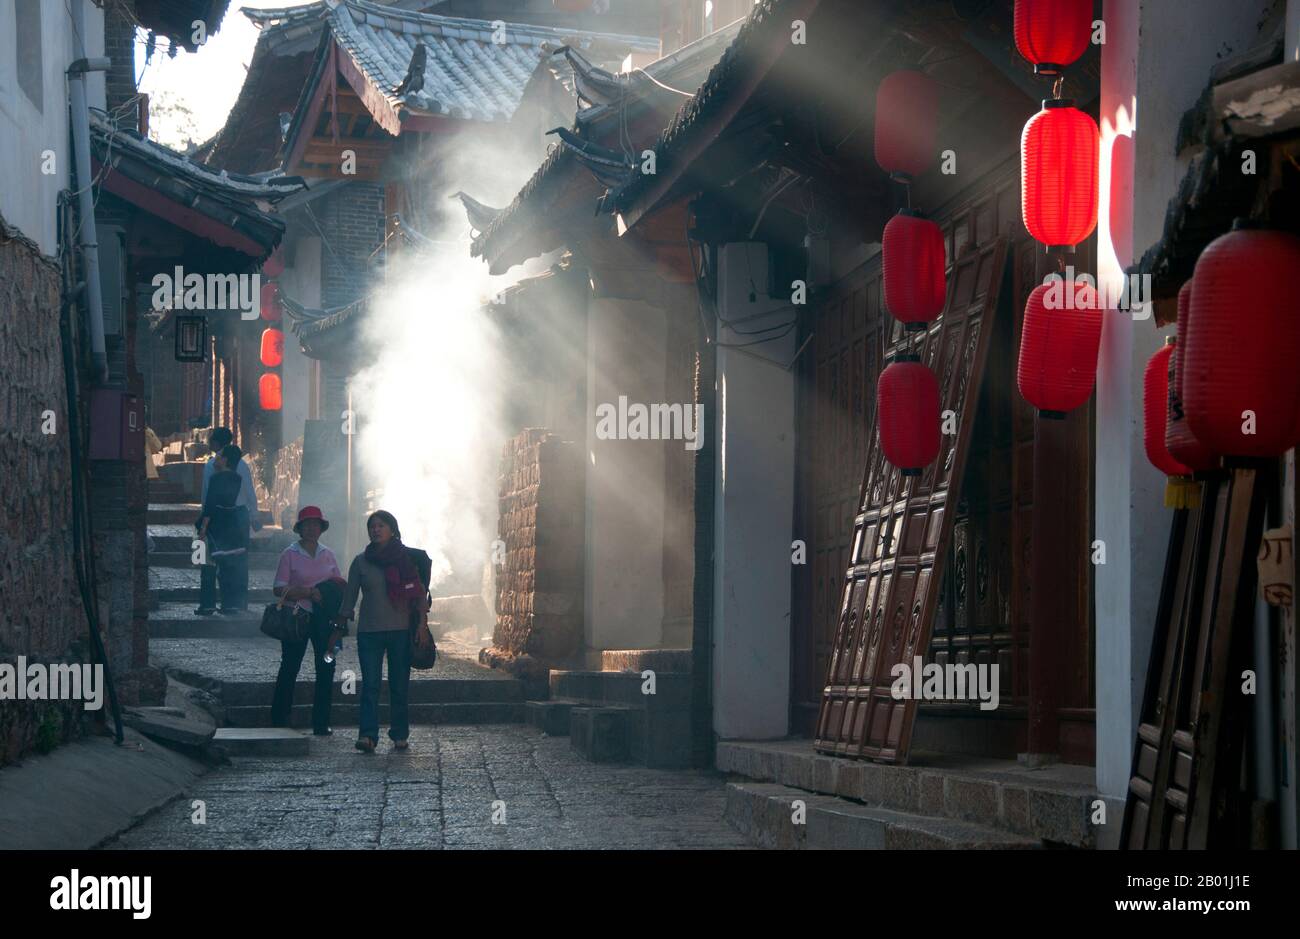 China: A smoky back street, Lijiang Old Town, Yunnan Province.  The Naxi or Nakhi are an ethnic group inhabiting the foothills of the Himalayas in the northwestern part of Yunnan Province, as well as the southwestern part of Sichuan Province in China. The Naxi are thought to have come originally from Tibet and, until recently, maintained overland trading links with Lhasa and India.  The Naxi form one of the 56 ethnic groups officially recognised by the People's Republic of China. The Naxi are traditionally followers of the Dongba religion. Stock Photo